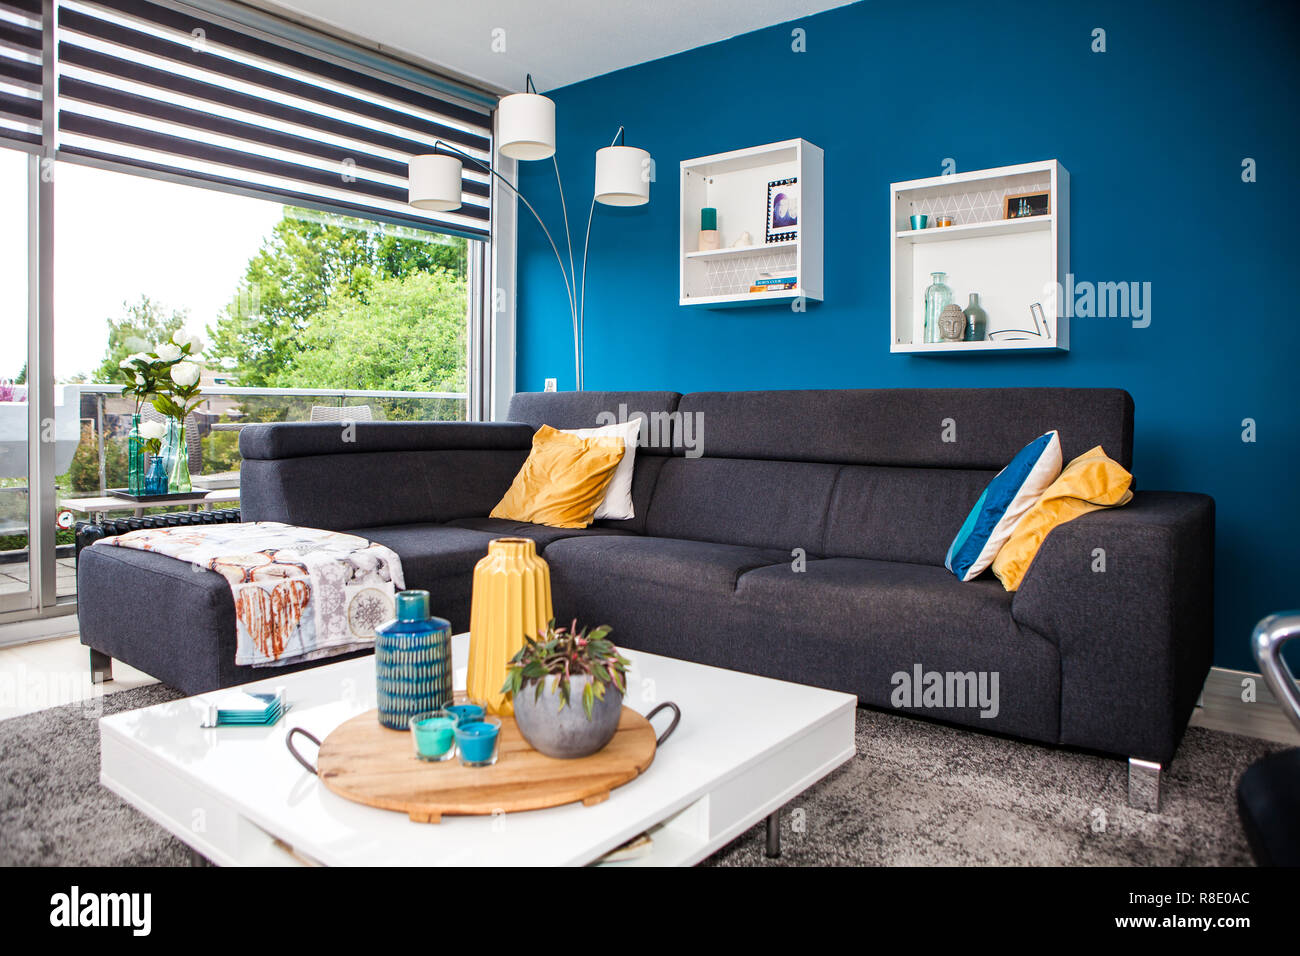 Modern living room design with sofa and yellow and blue colors. Stock Photo